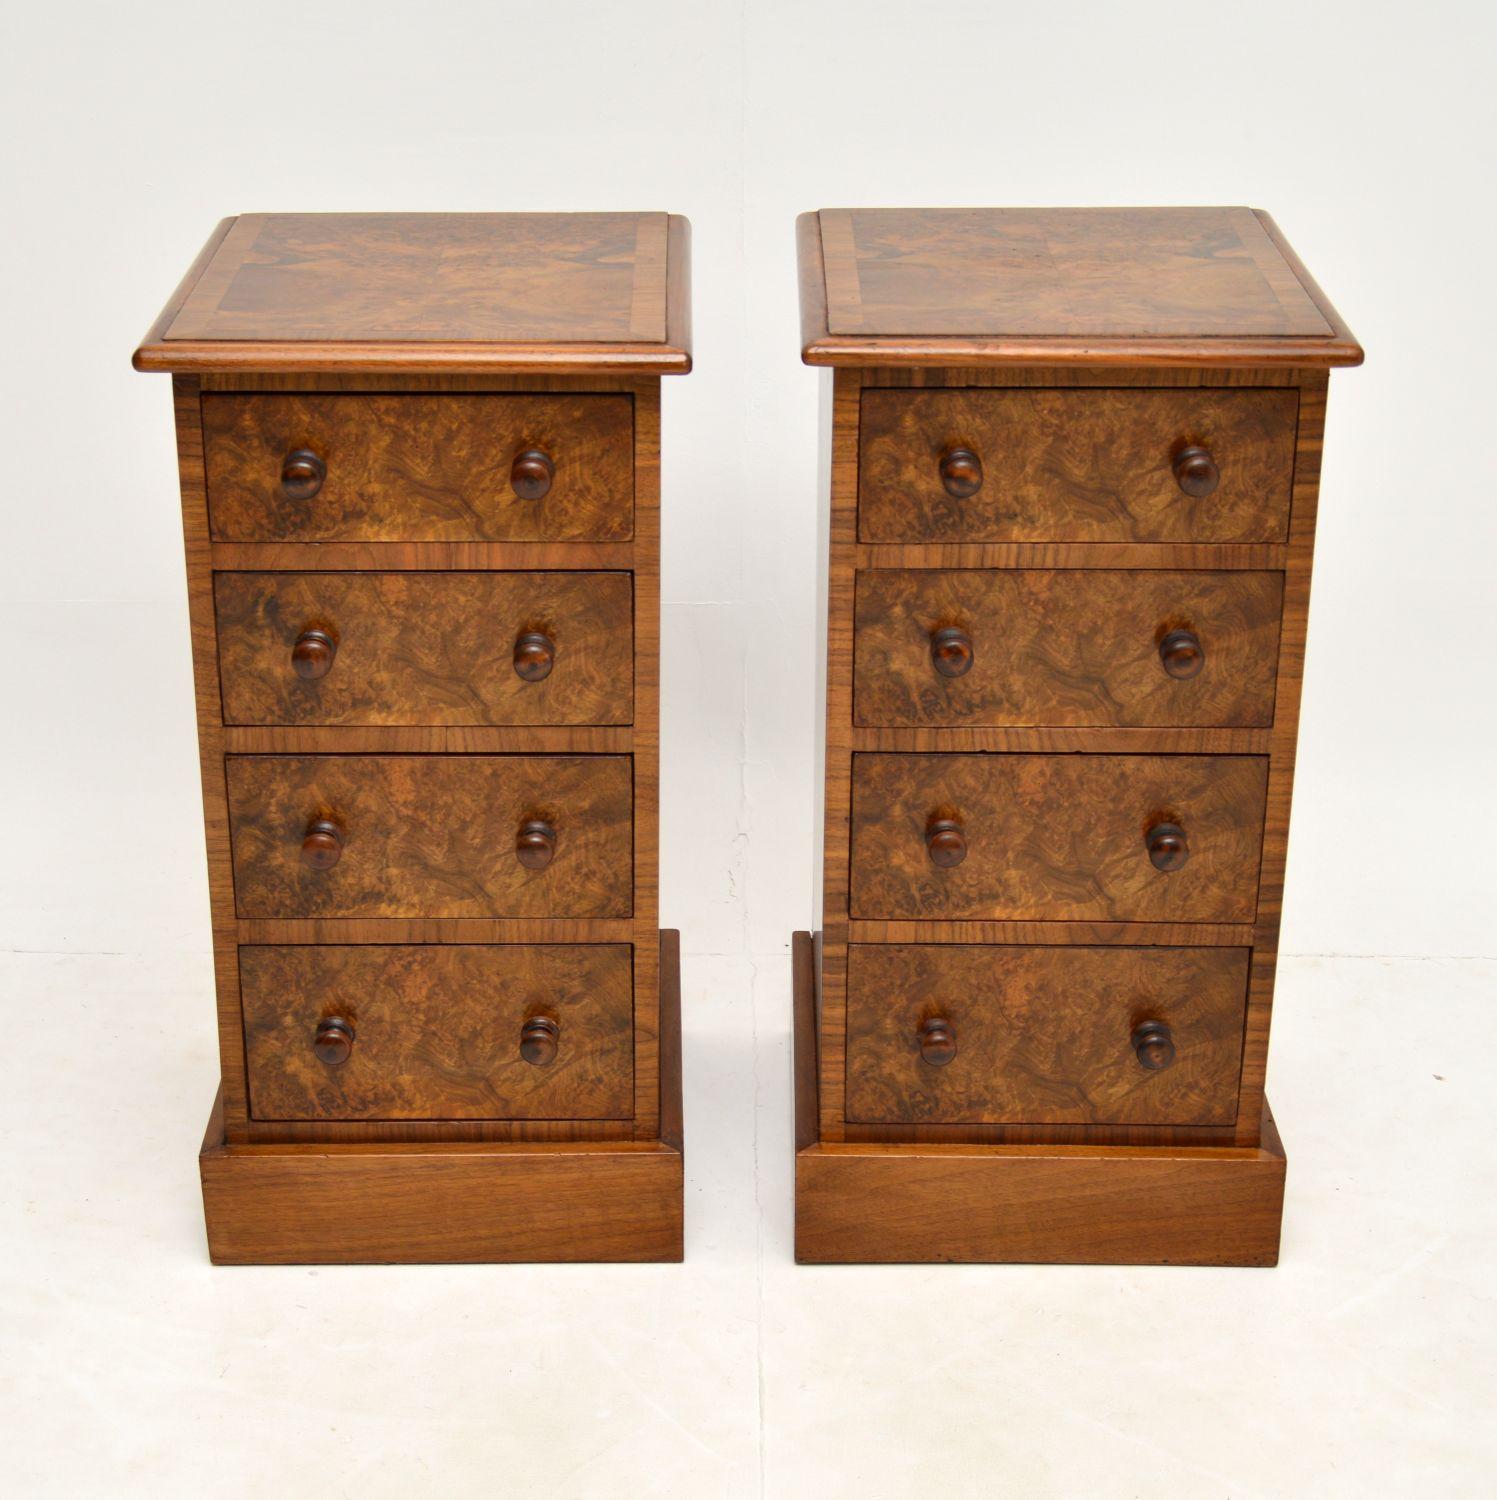 A beautiful and very useful pair of antique bedside chests, beautifully finished in burr walnut.

We have had them partially re-constructed from a parts of an antique dressing chest, they are a stunning burr walnut and they have had new walnut